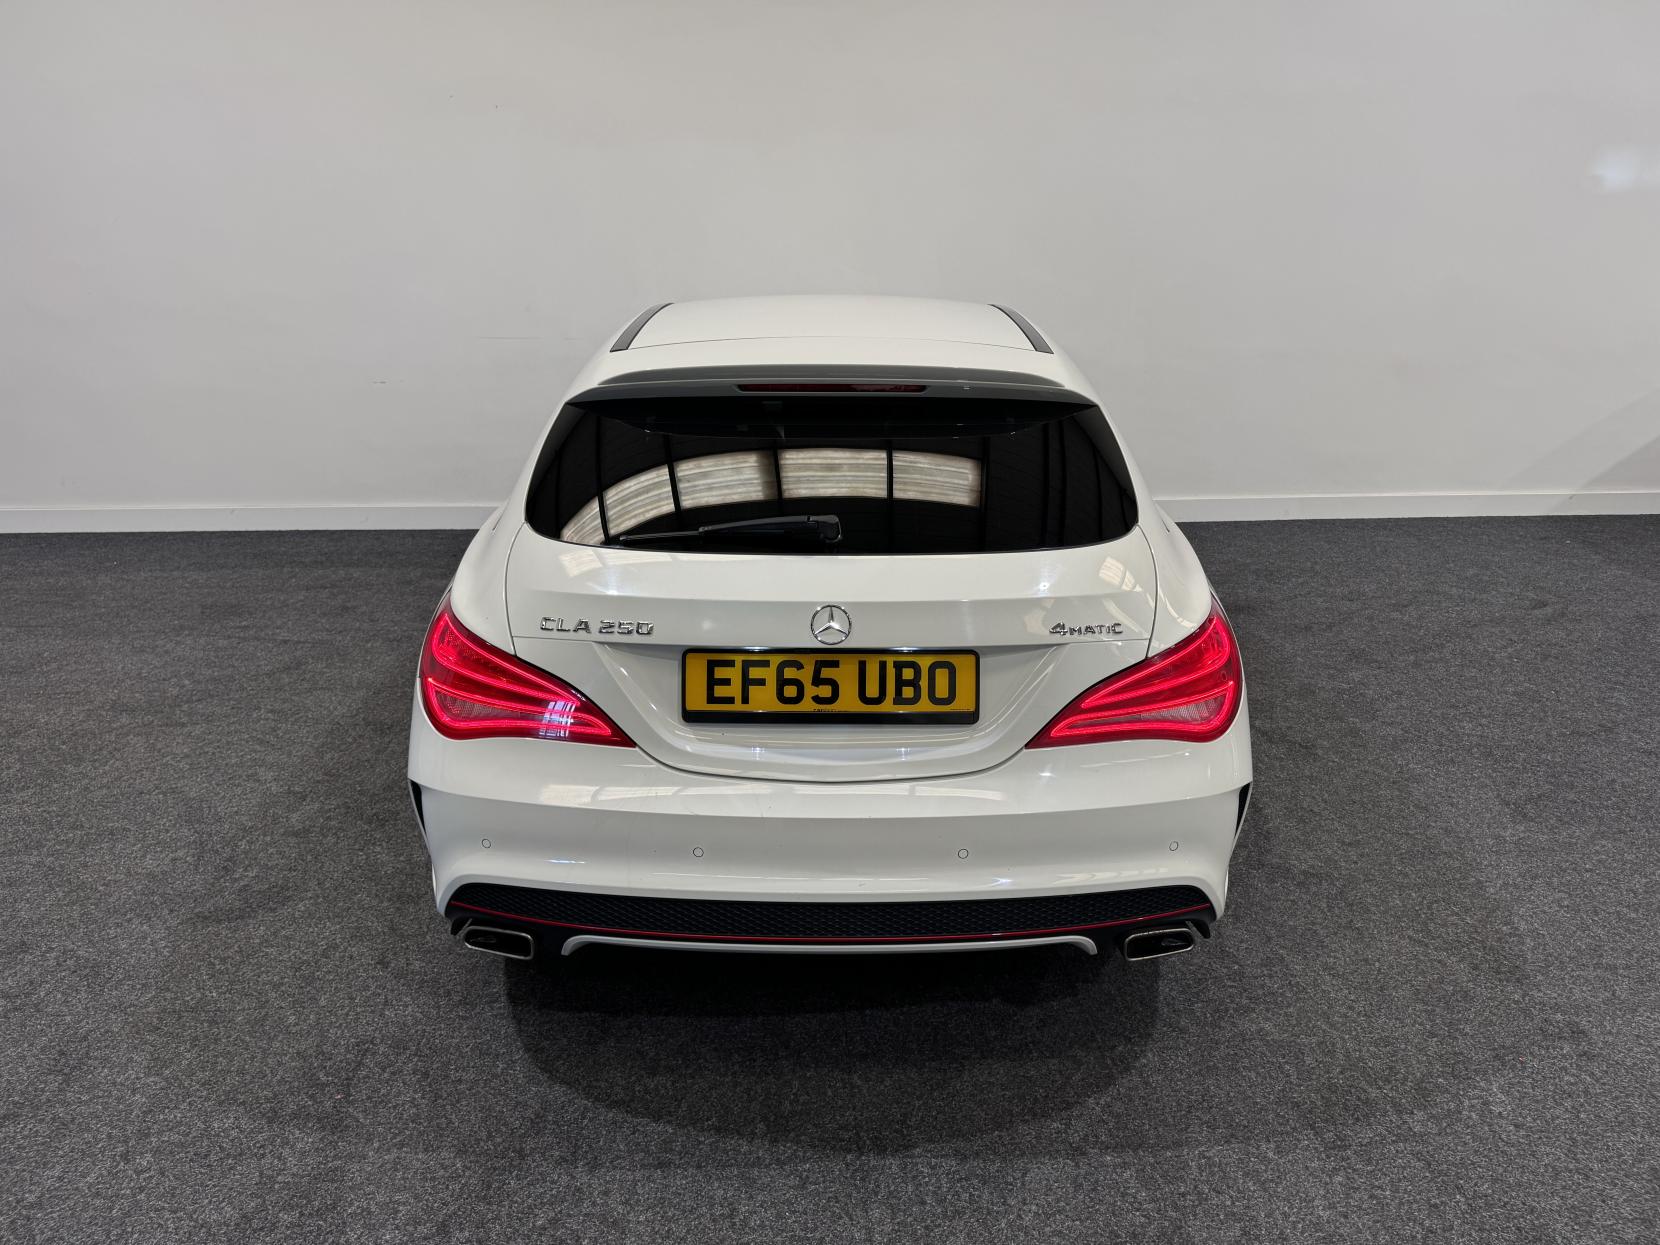 Mercedes-Benz CLA Class 2.0 CLA250 Engineered by AMG Shooting Brake 5dr Petrol 7G-DCT 4MATIC Euro 6 (s/s) (211 ps)